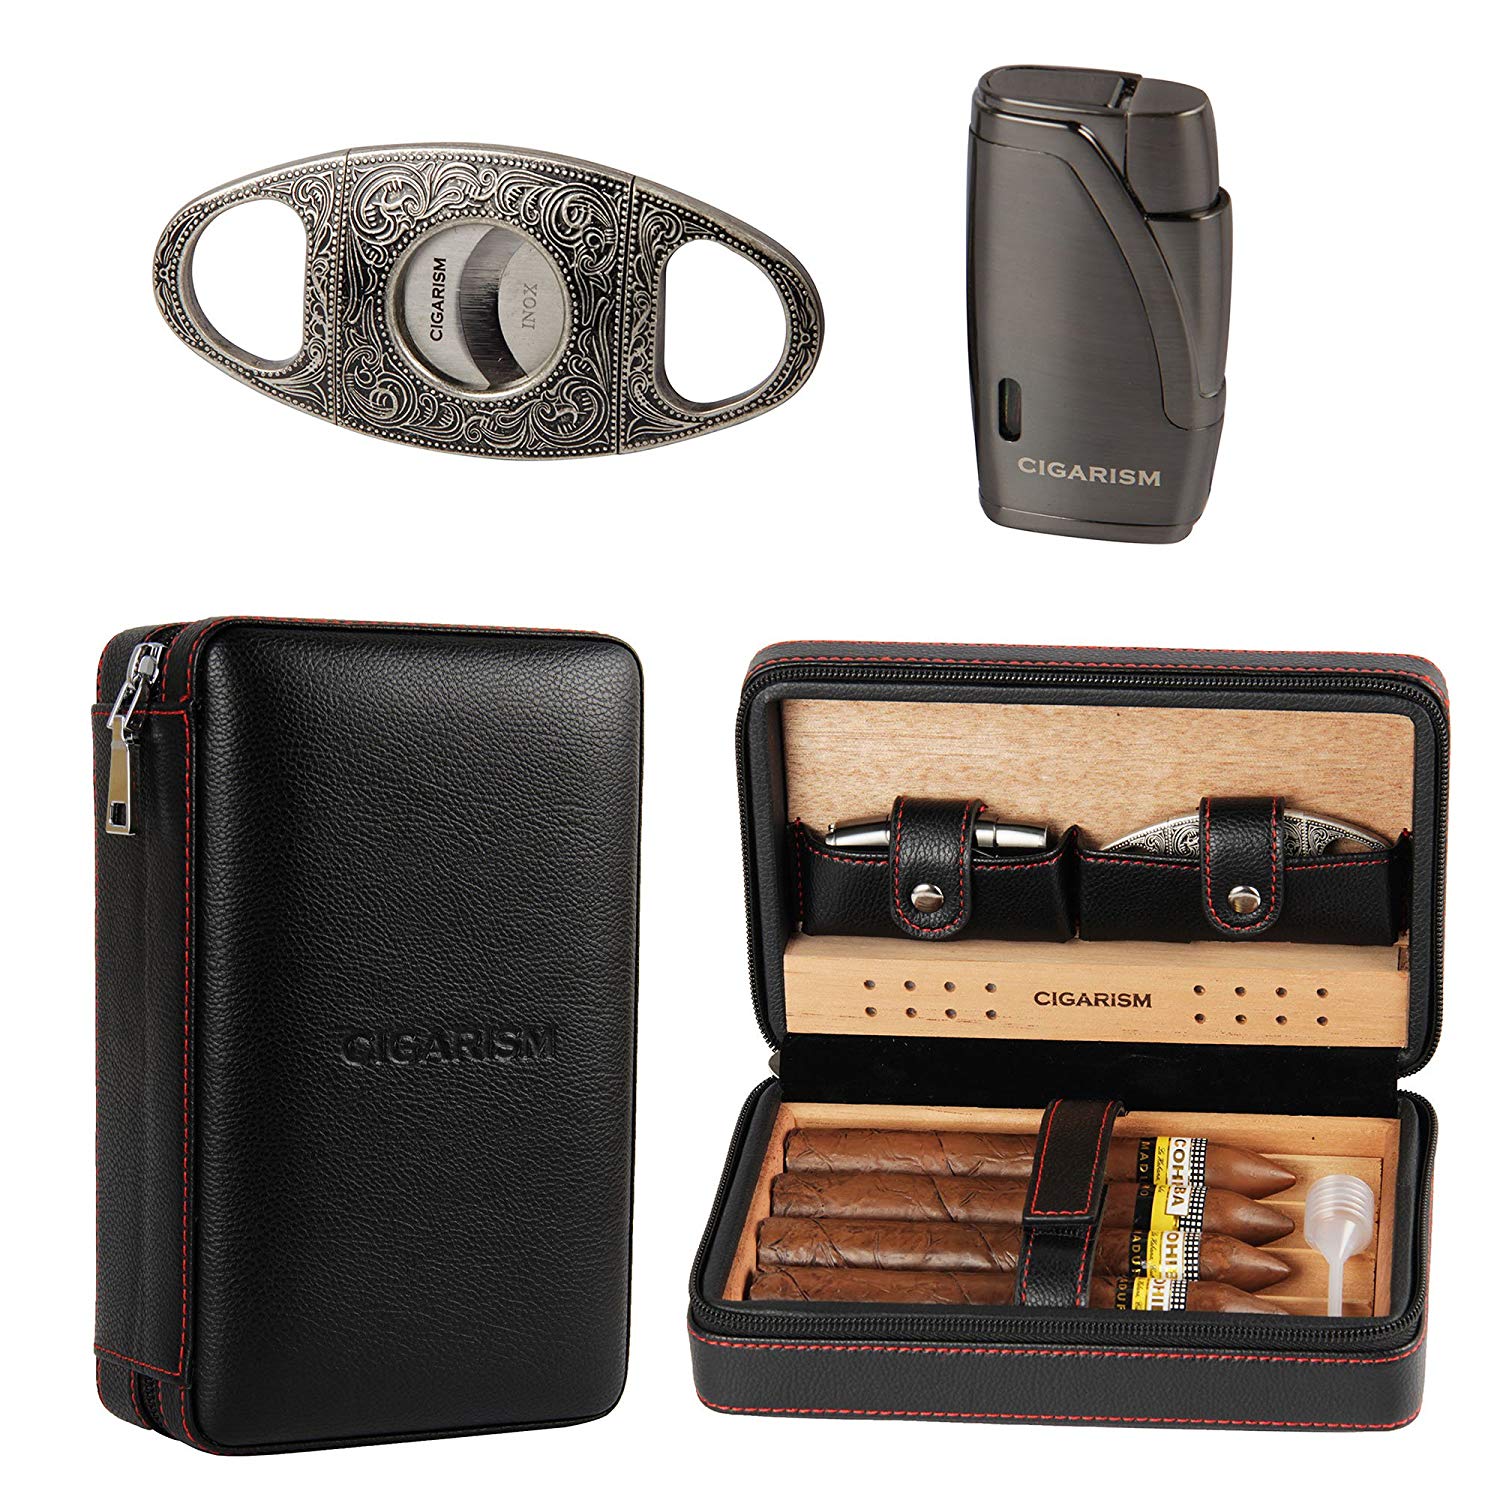 Volenx travel cigar case, Volenx travel cigar case review